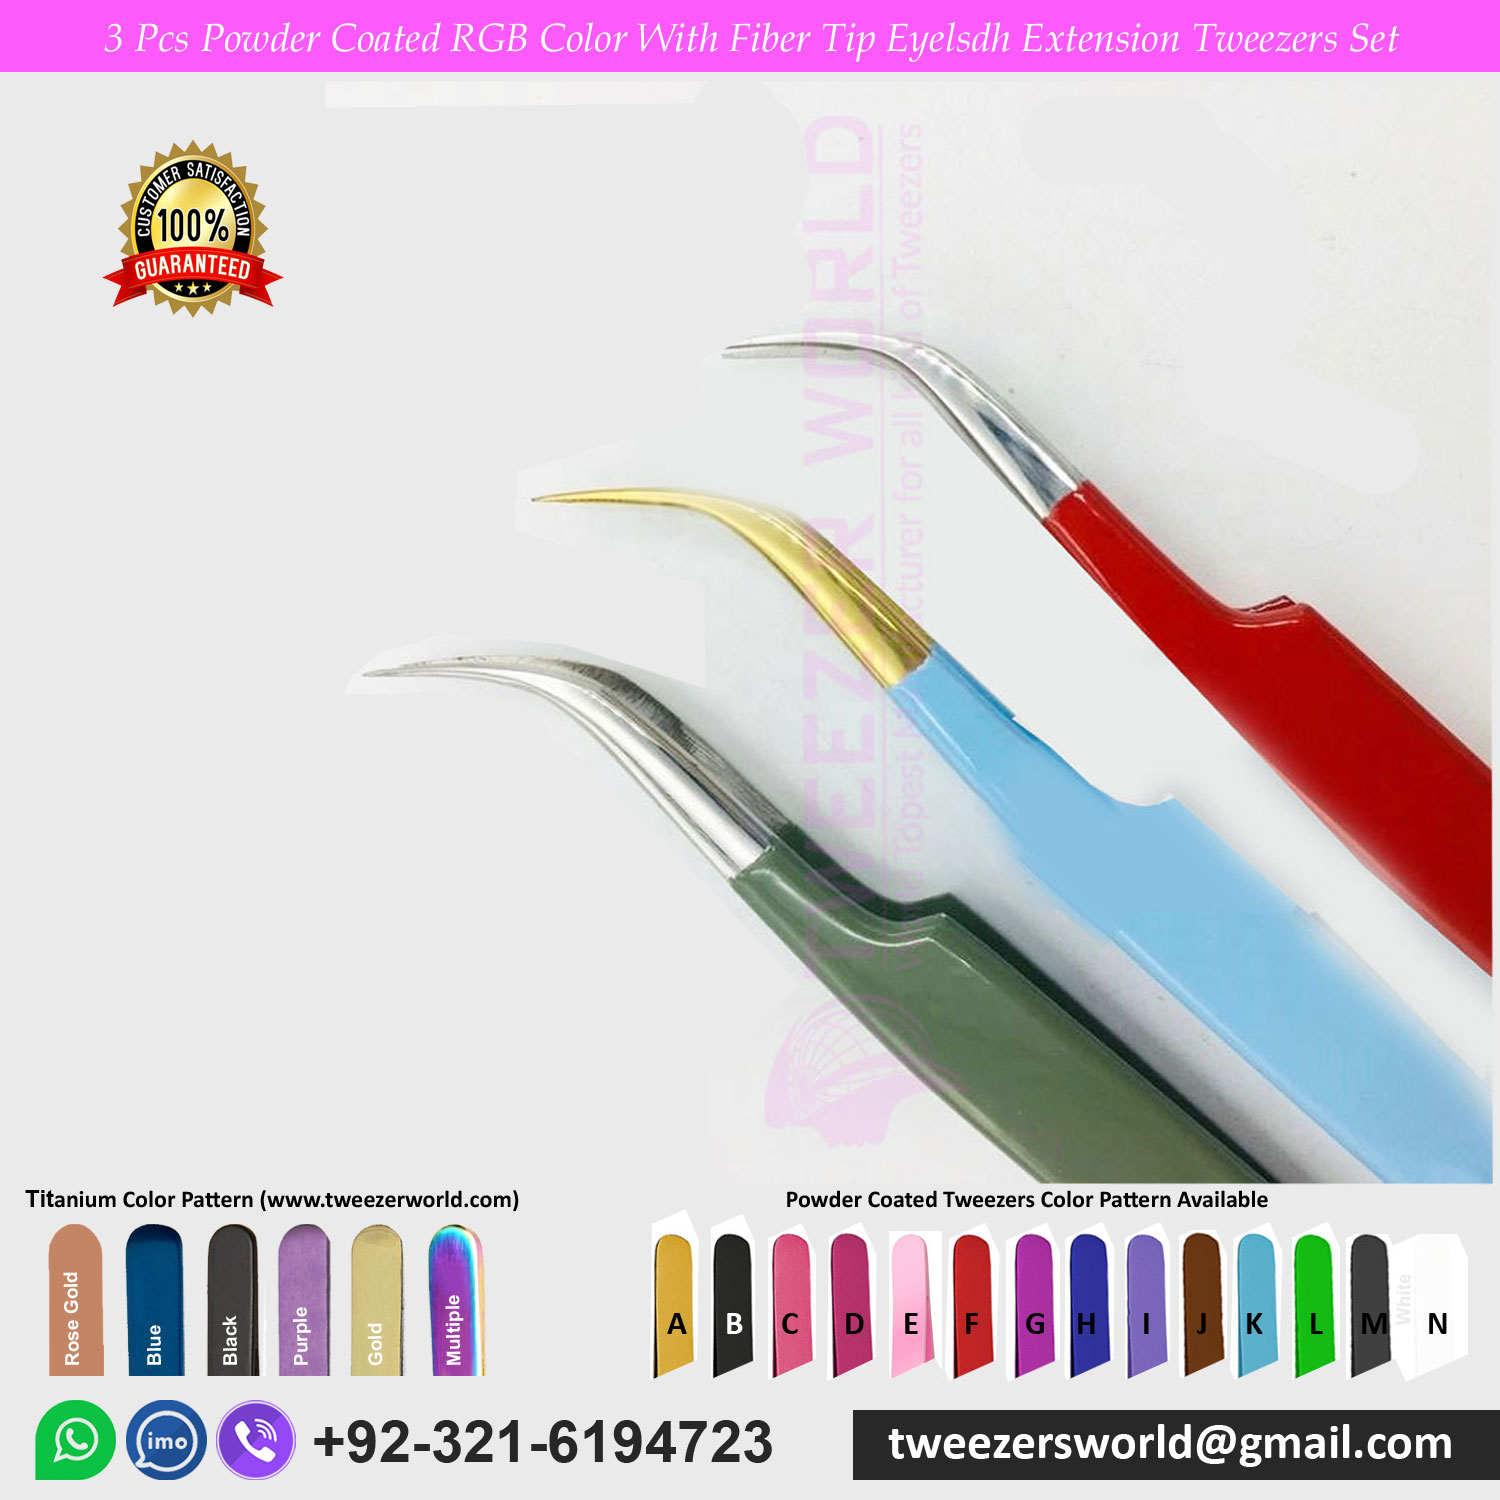 3 Pcs Powder Coated RGB Color With Fiber Tip Eyelash Extension Tweezers Set For professional Used